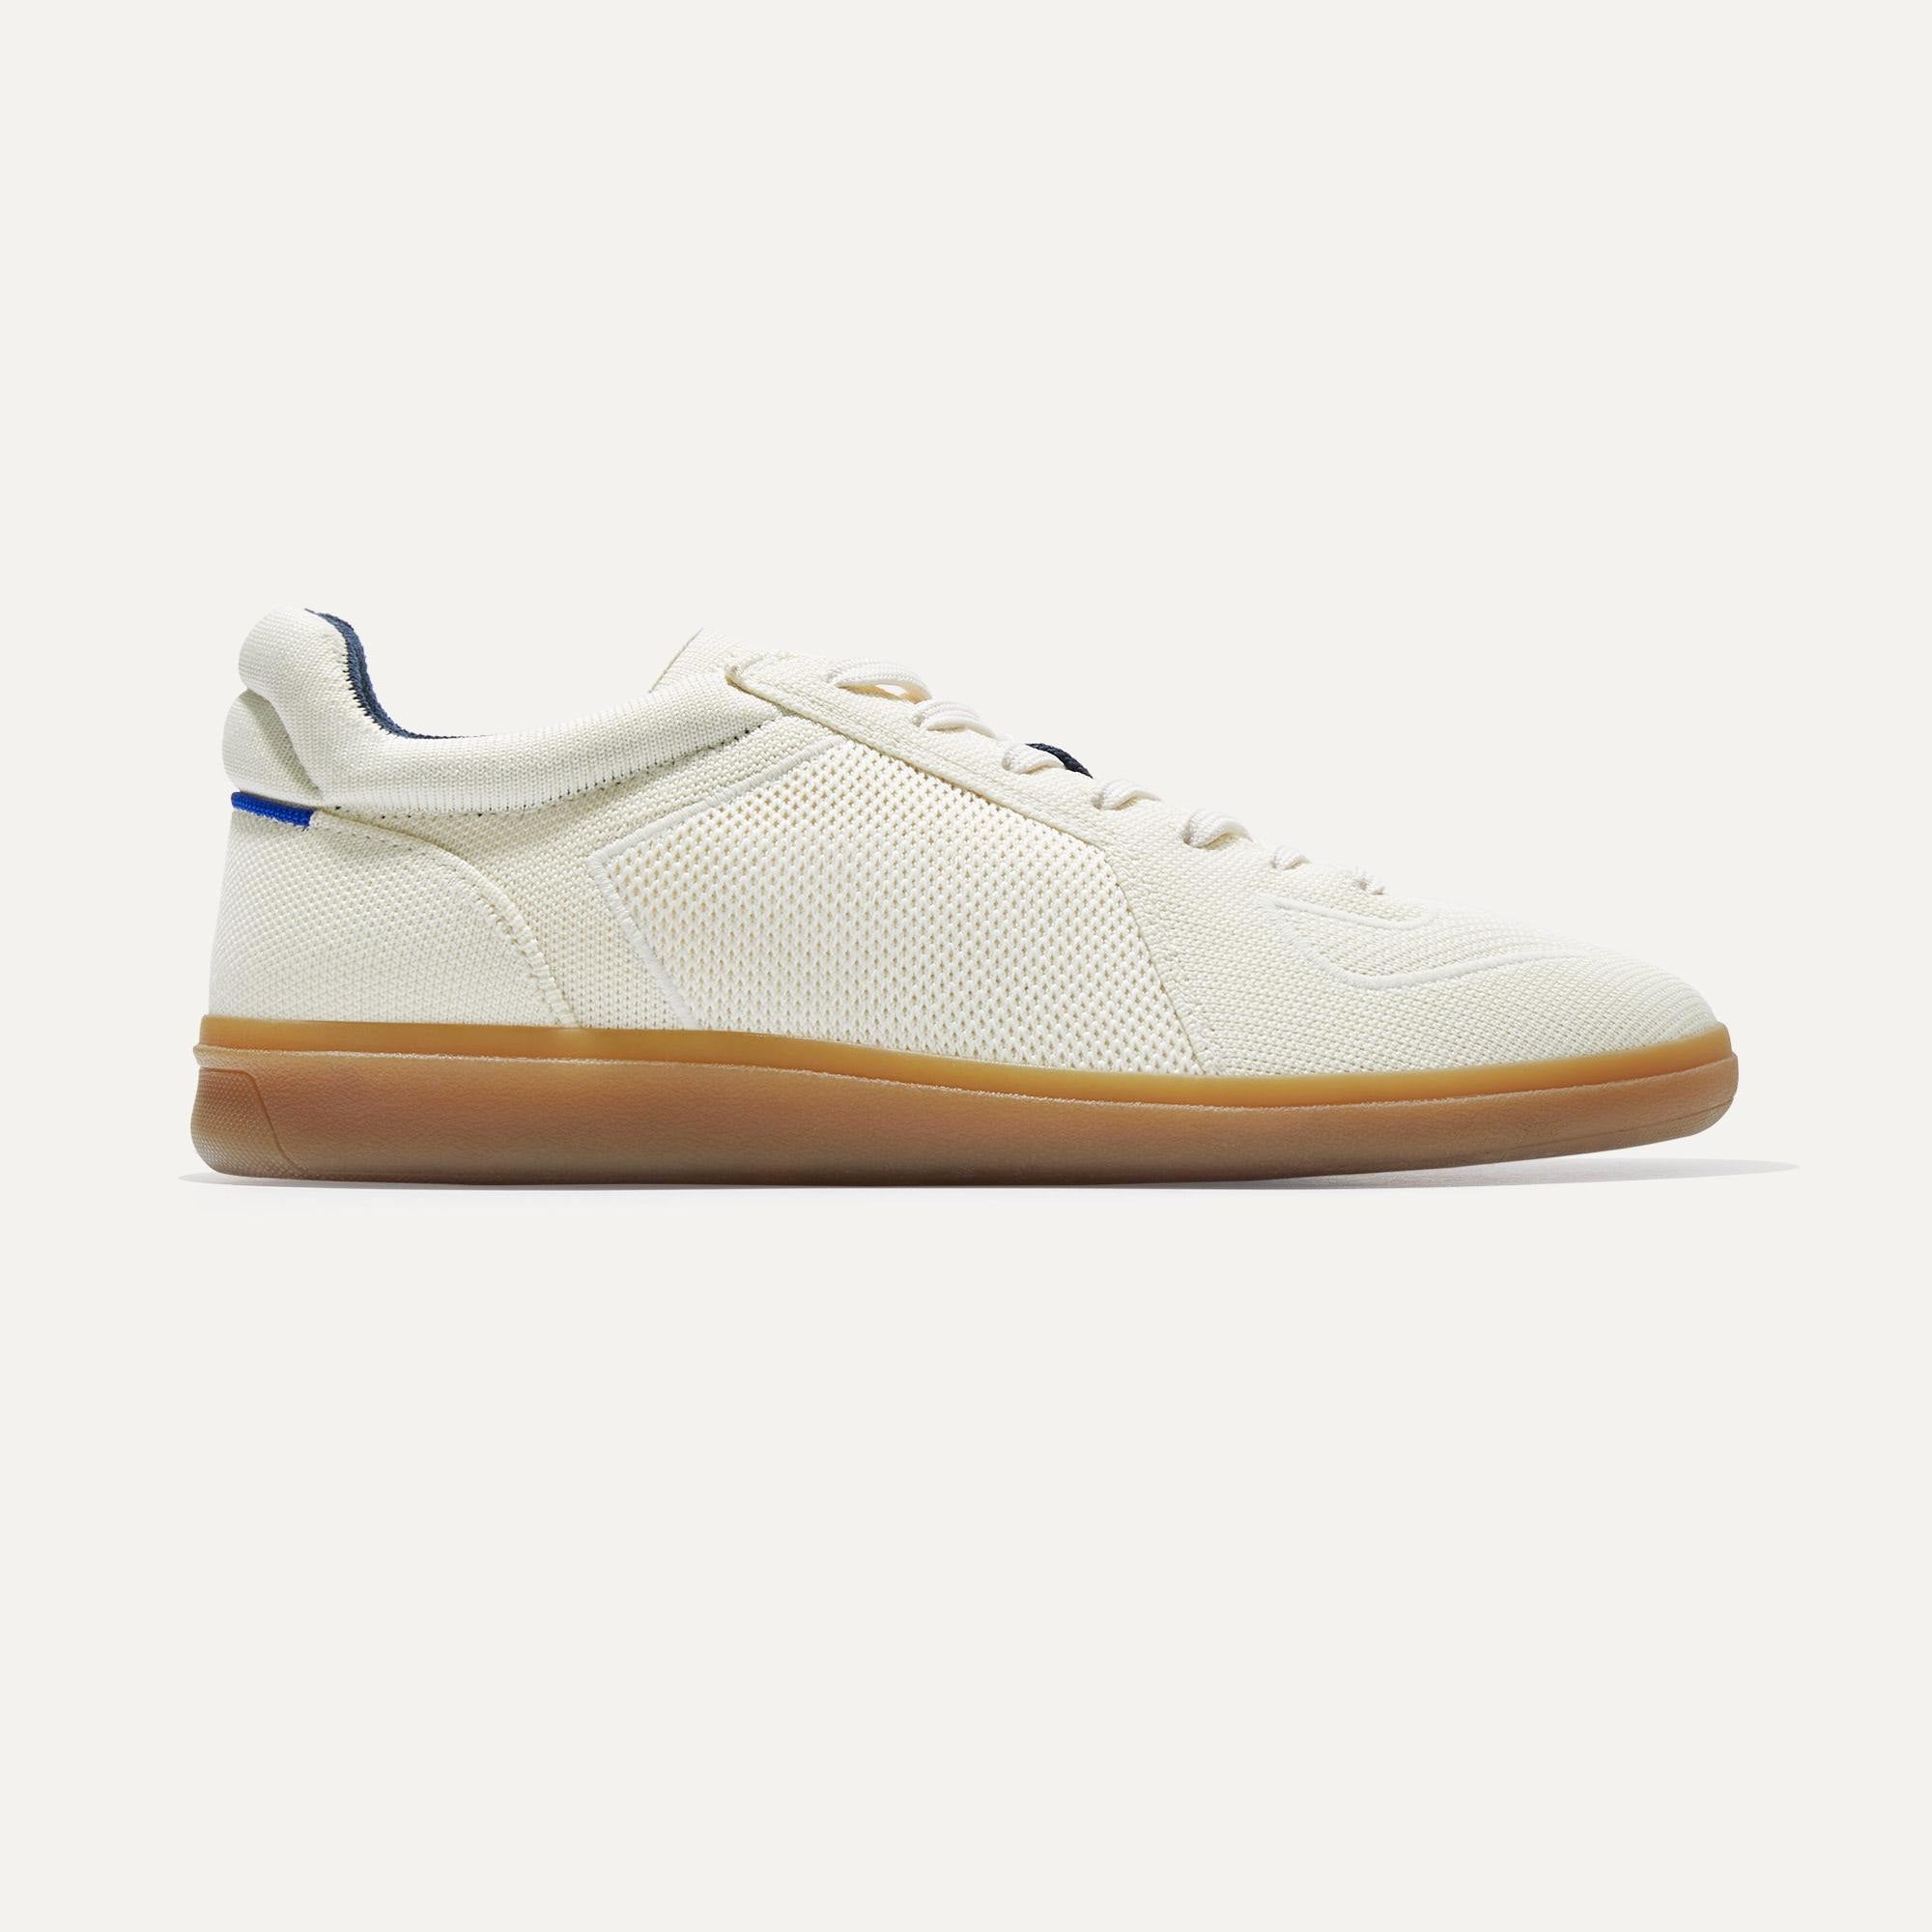 The RS01 Sneaker in Bone | Men’s Tennis Shoes | Rothy's